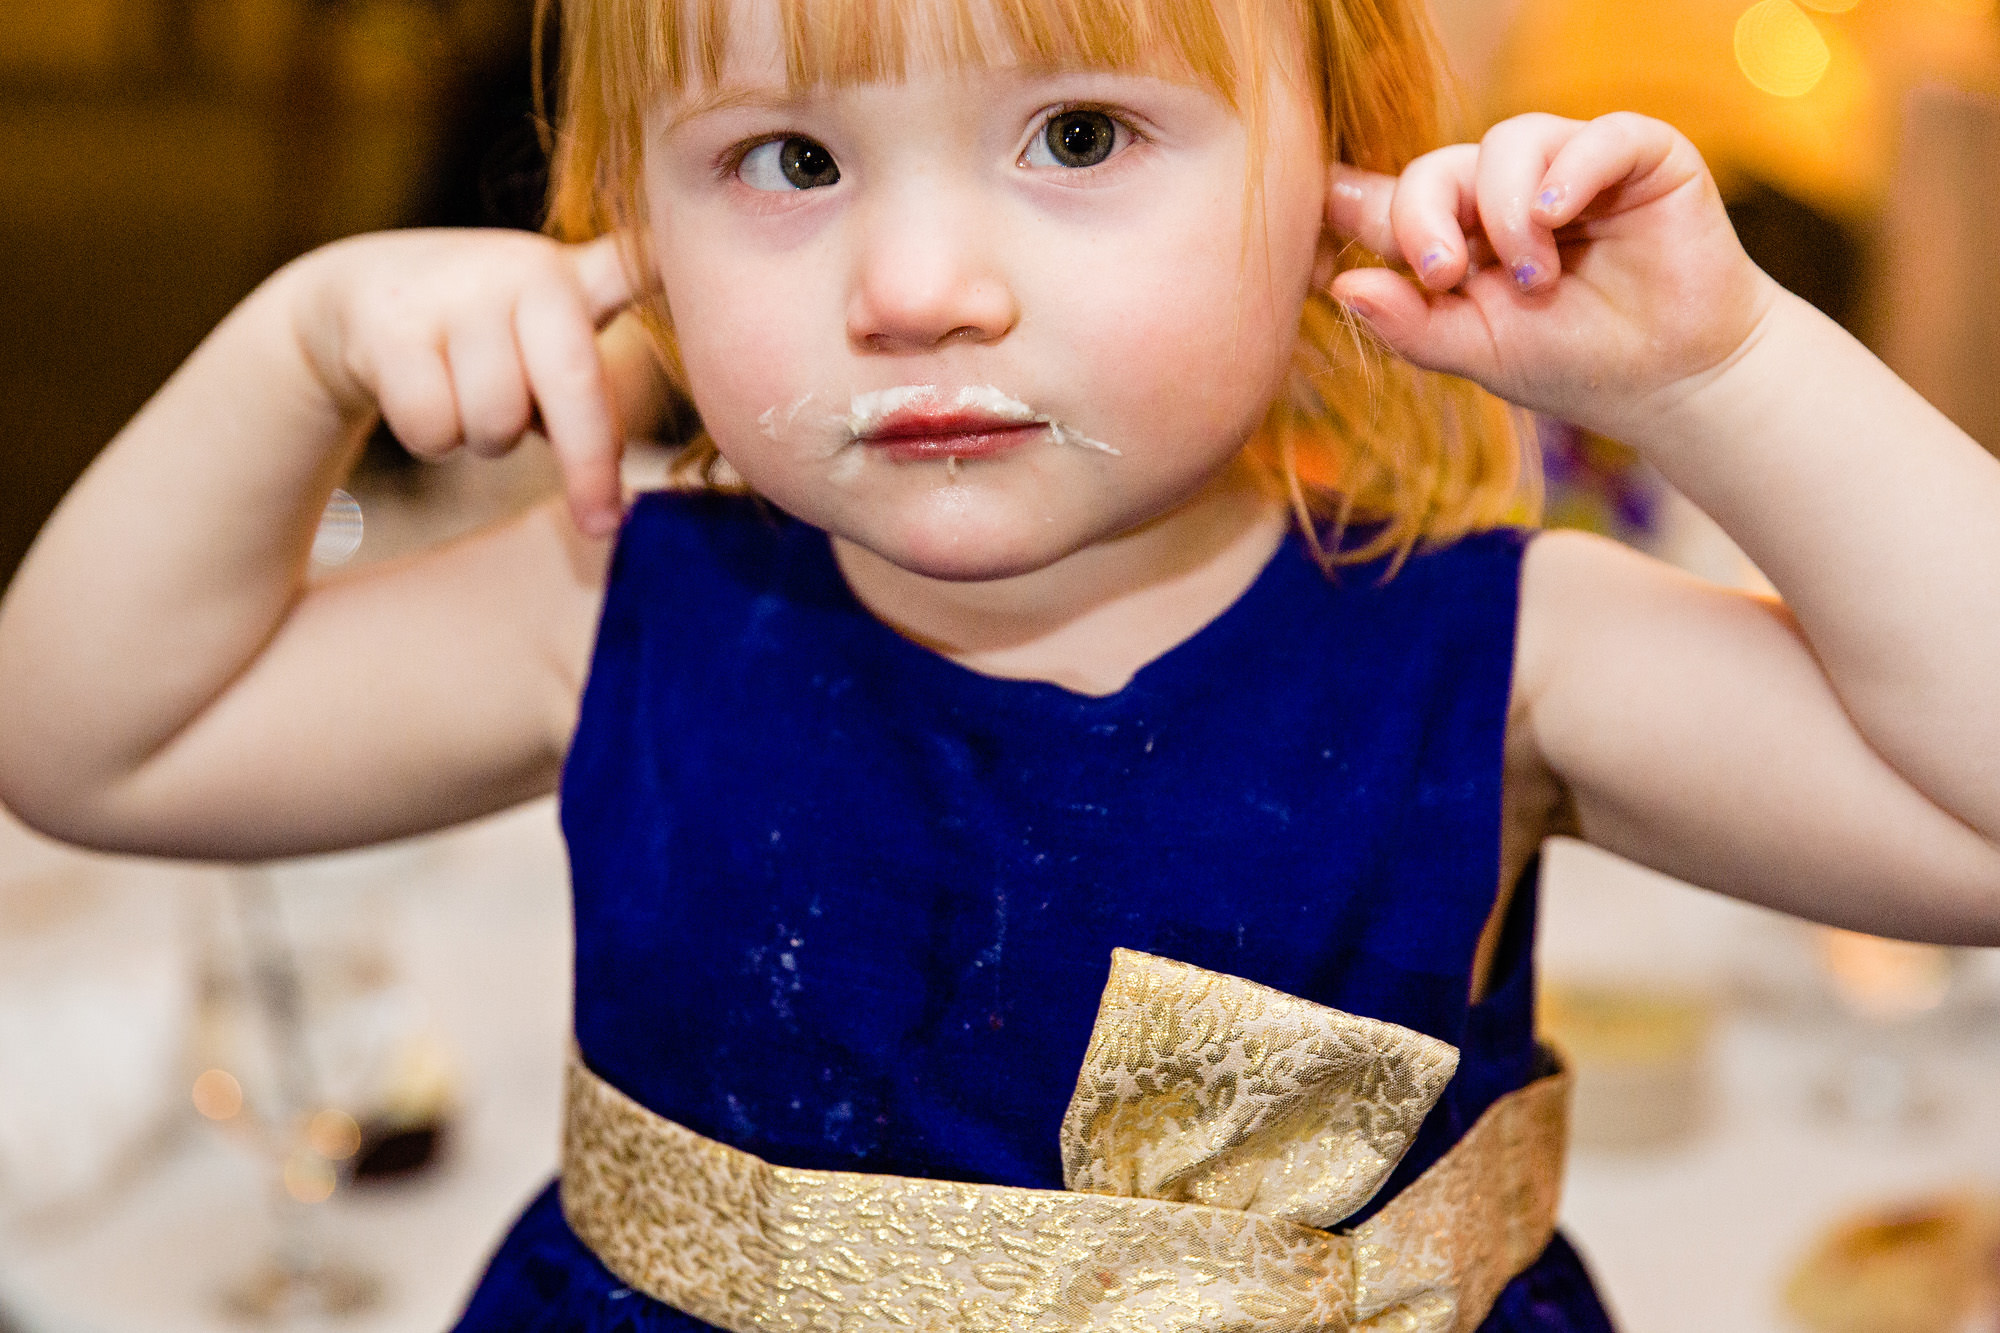 A young girl plugs her ears at a Freeport, Maine wedding